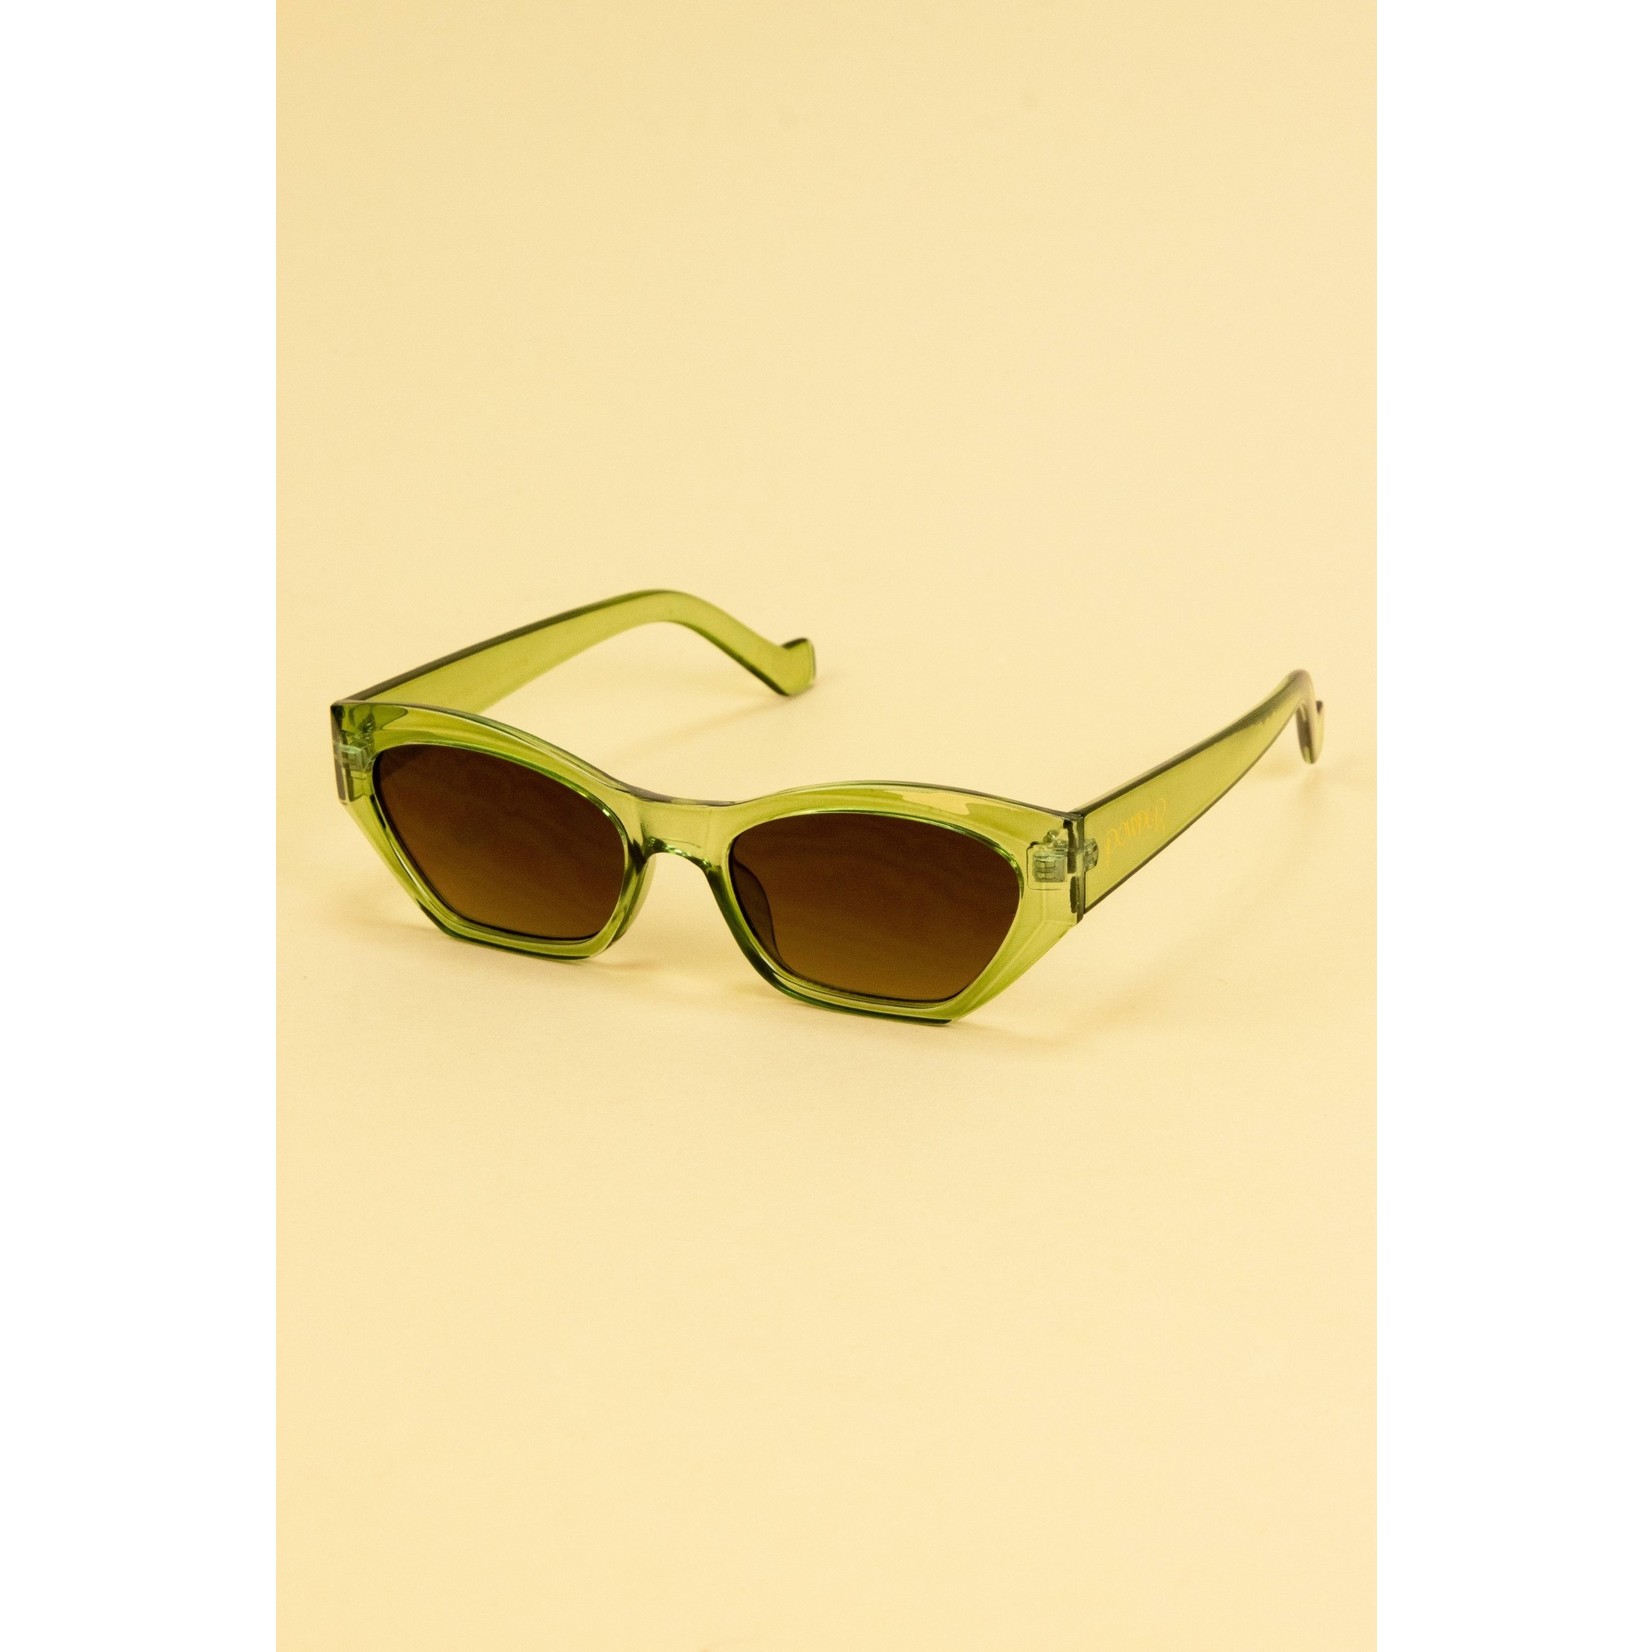 Powder Harlow Sunglasses in Forest Green